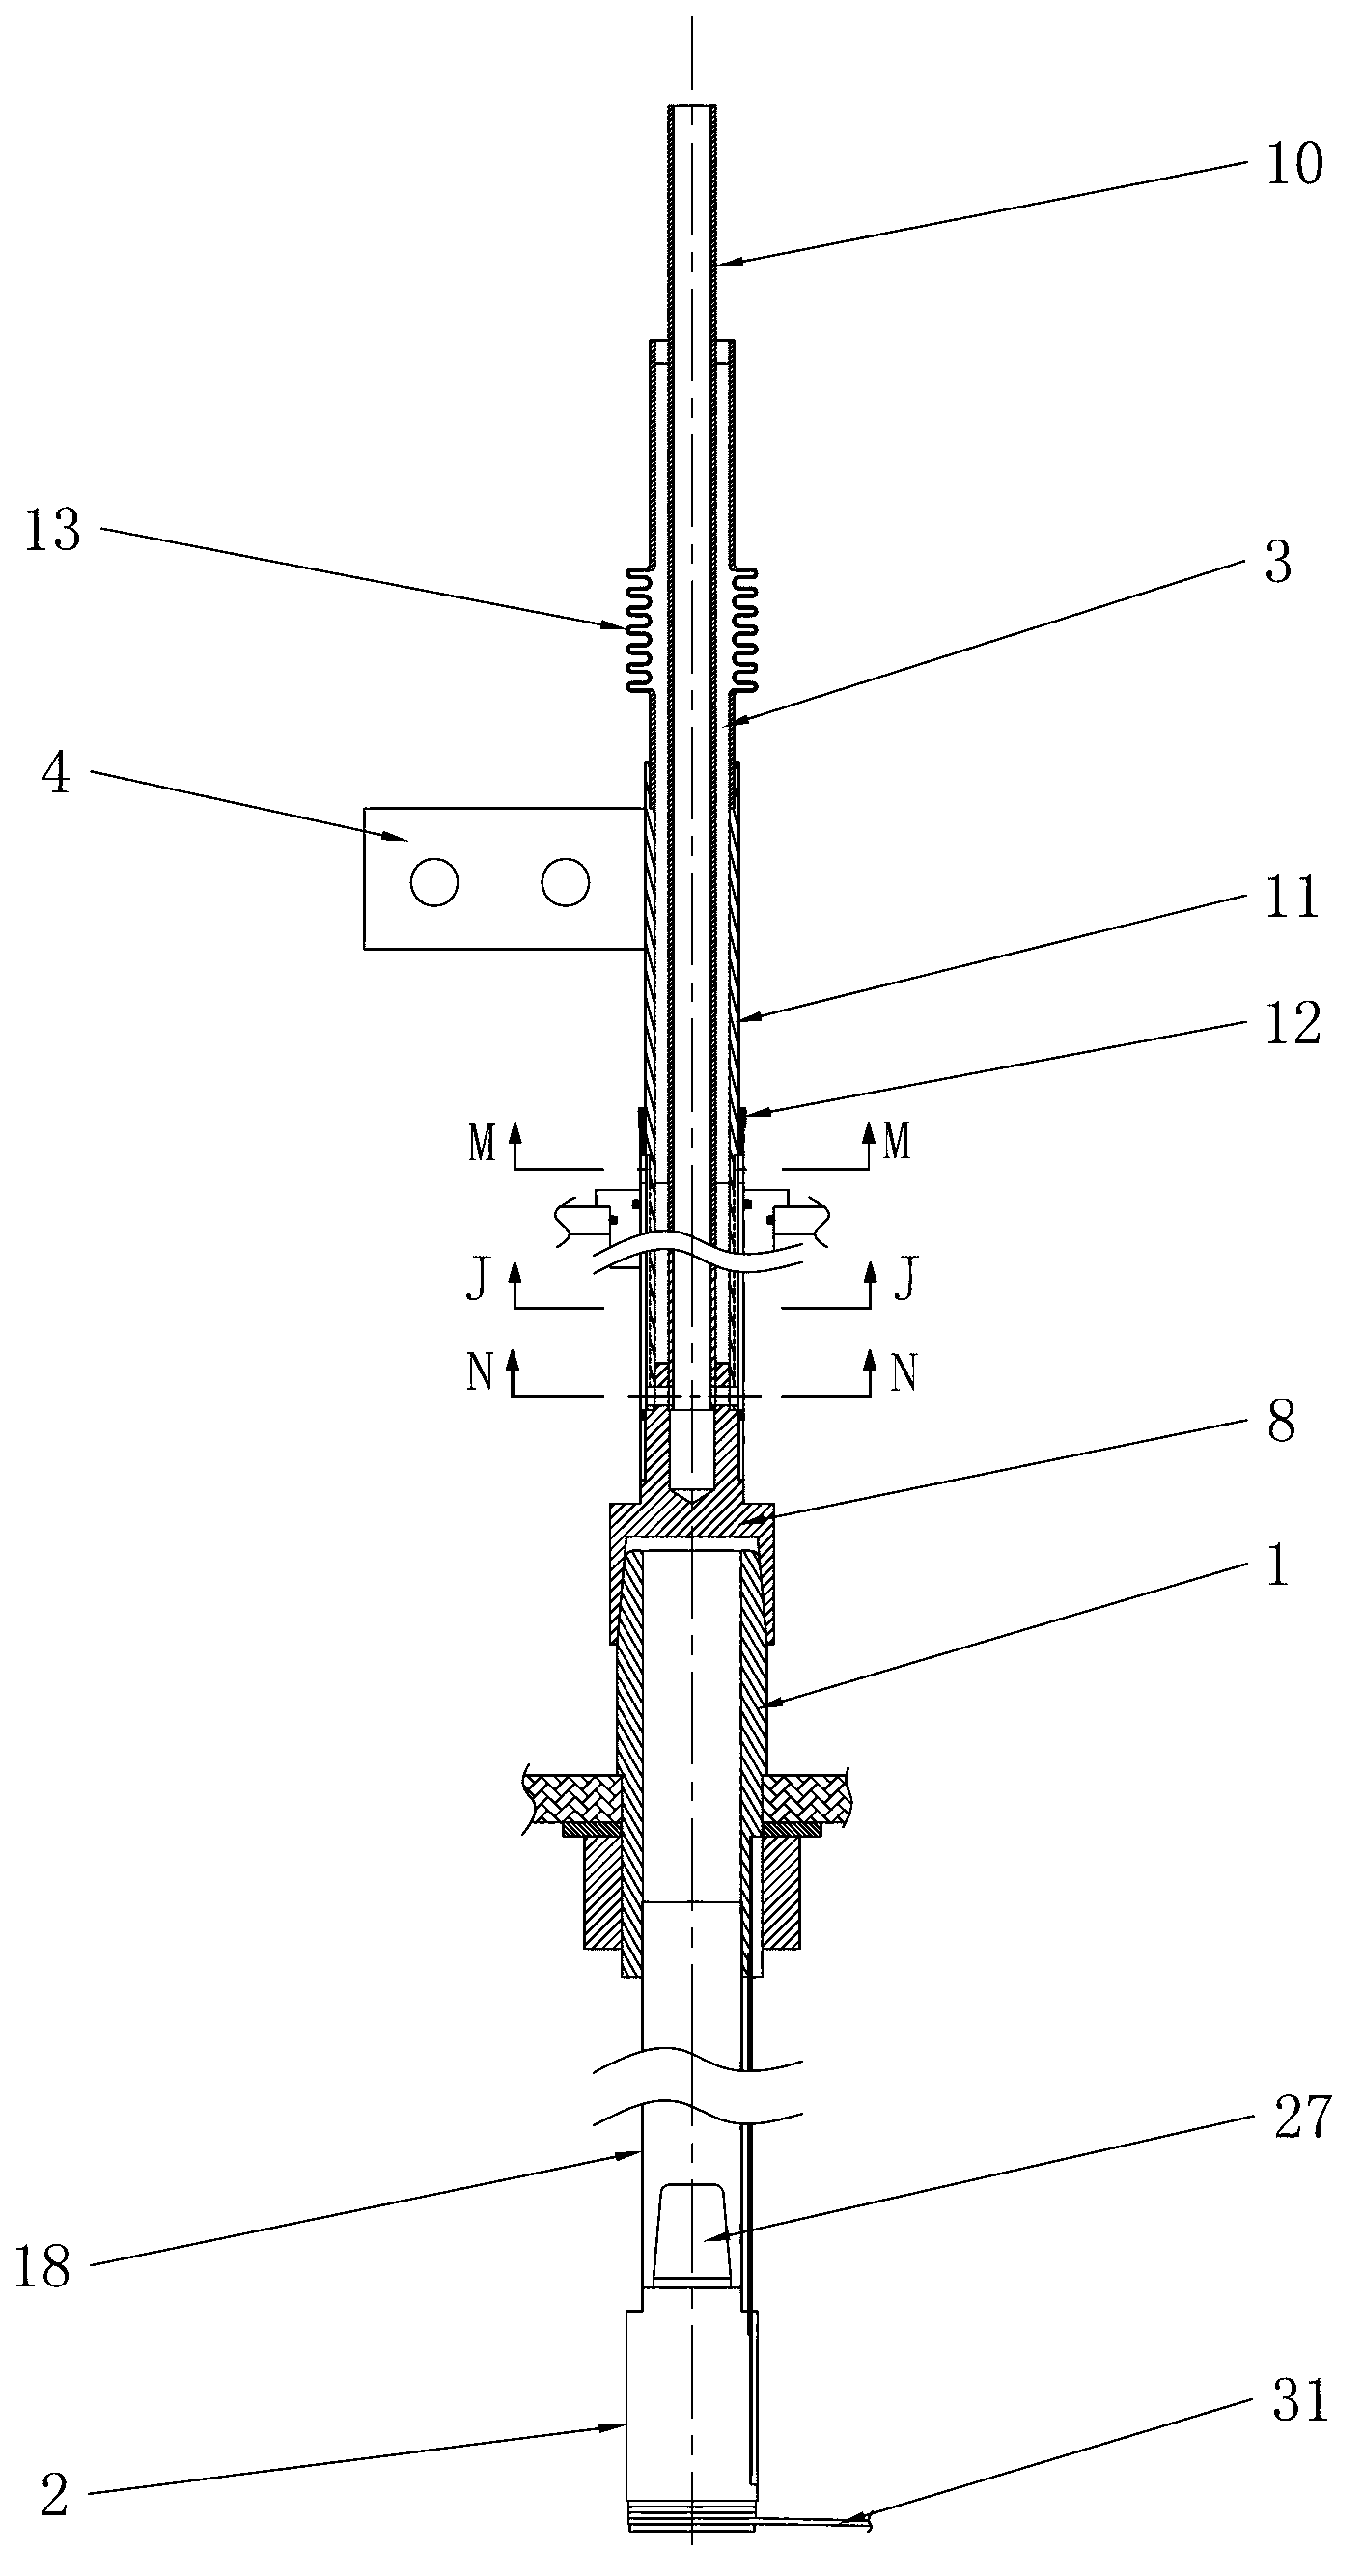 High-temperature superconducting current lead with section capable of being pulled out and using externally supplied liquid nitrogen to cool